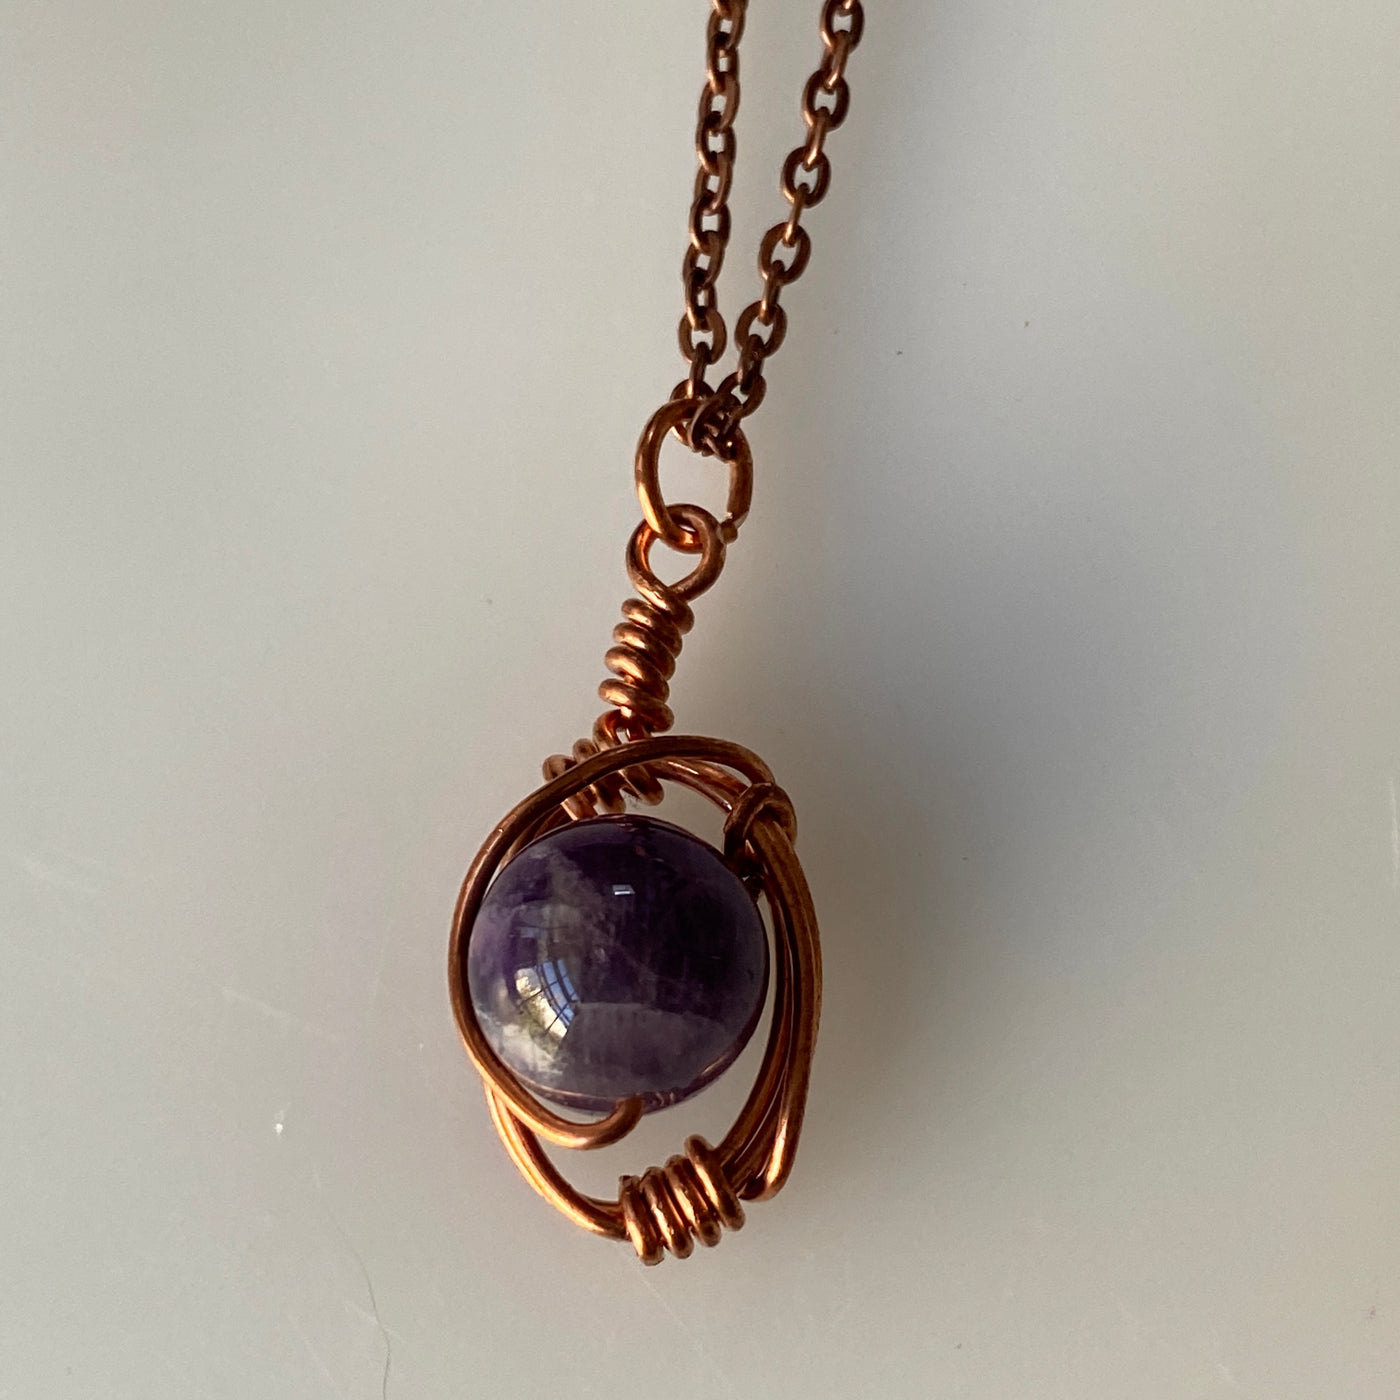 Amethyst on wire and chain small pendant for Shake and move collection.